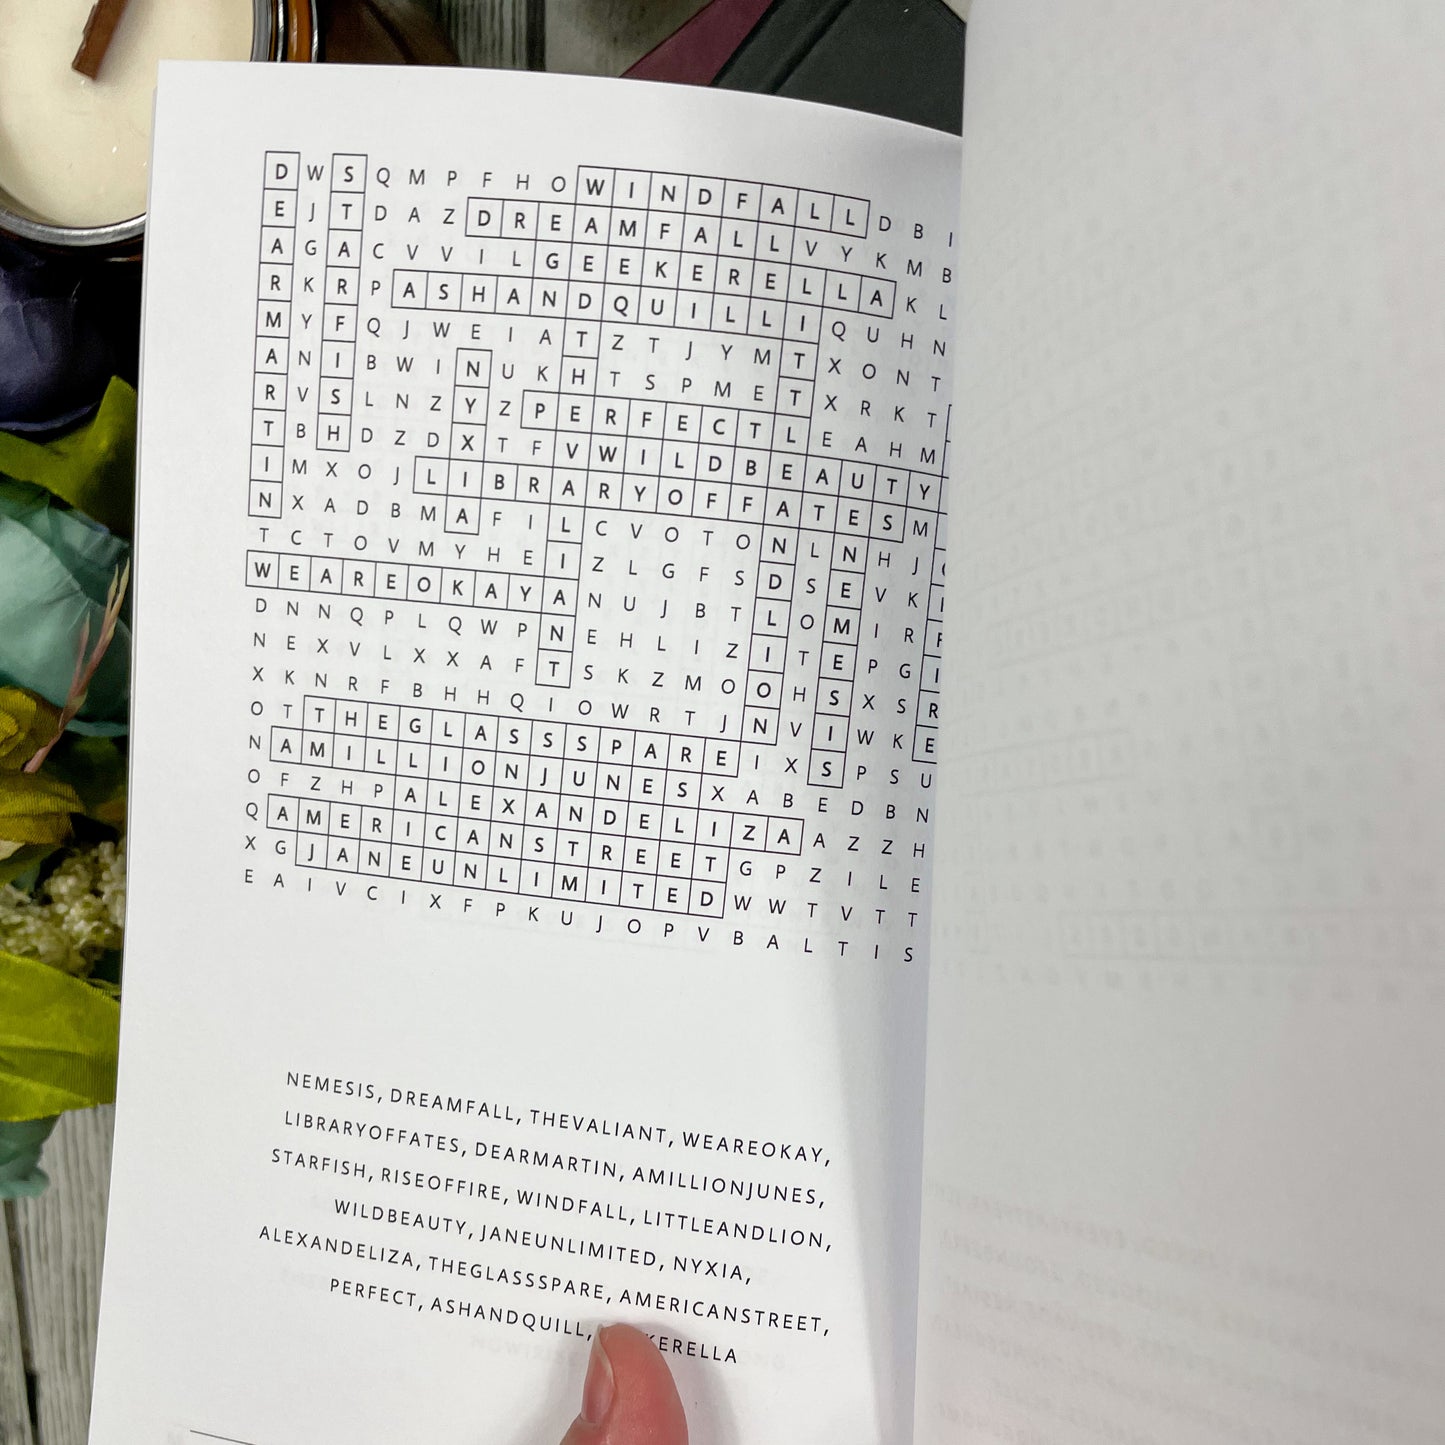 Word Searches for Adults Book Titles Themed: 5x8 inches, pocket word searches, bookish, 25 puzzles, solutions included